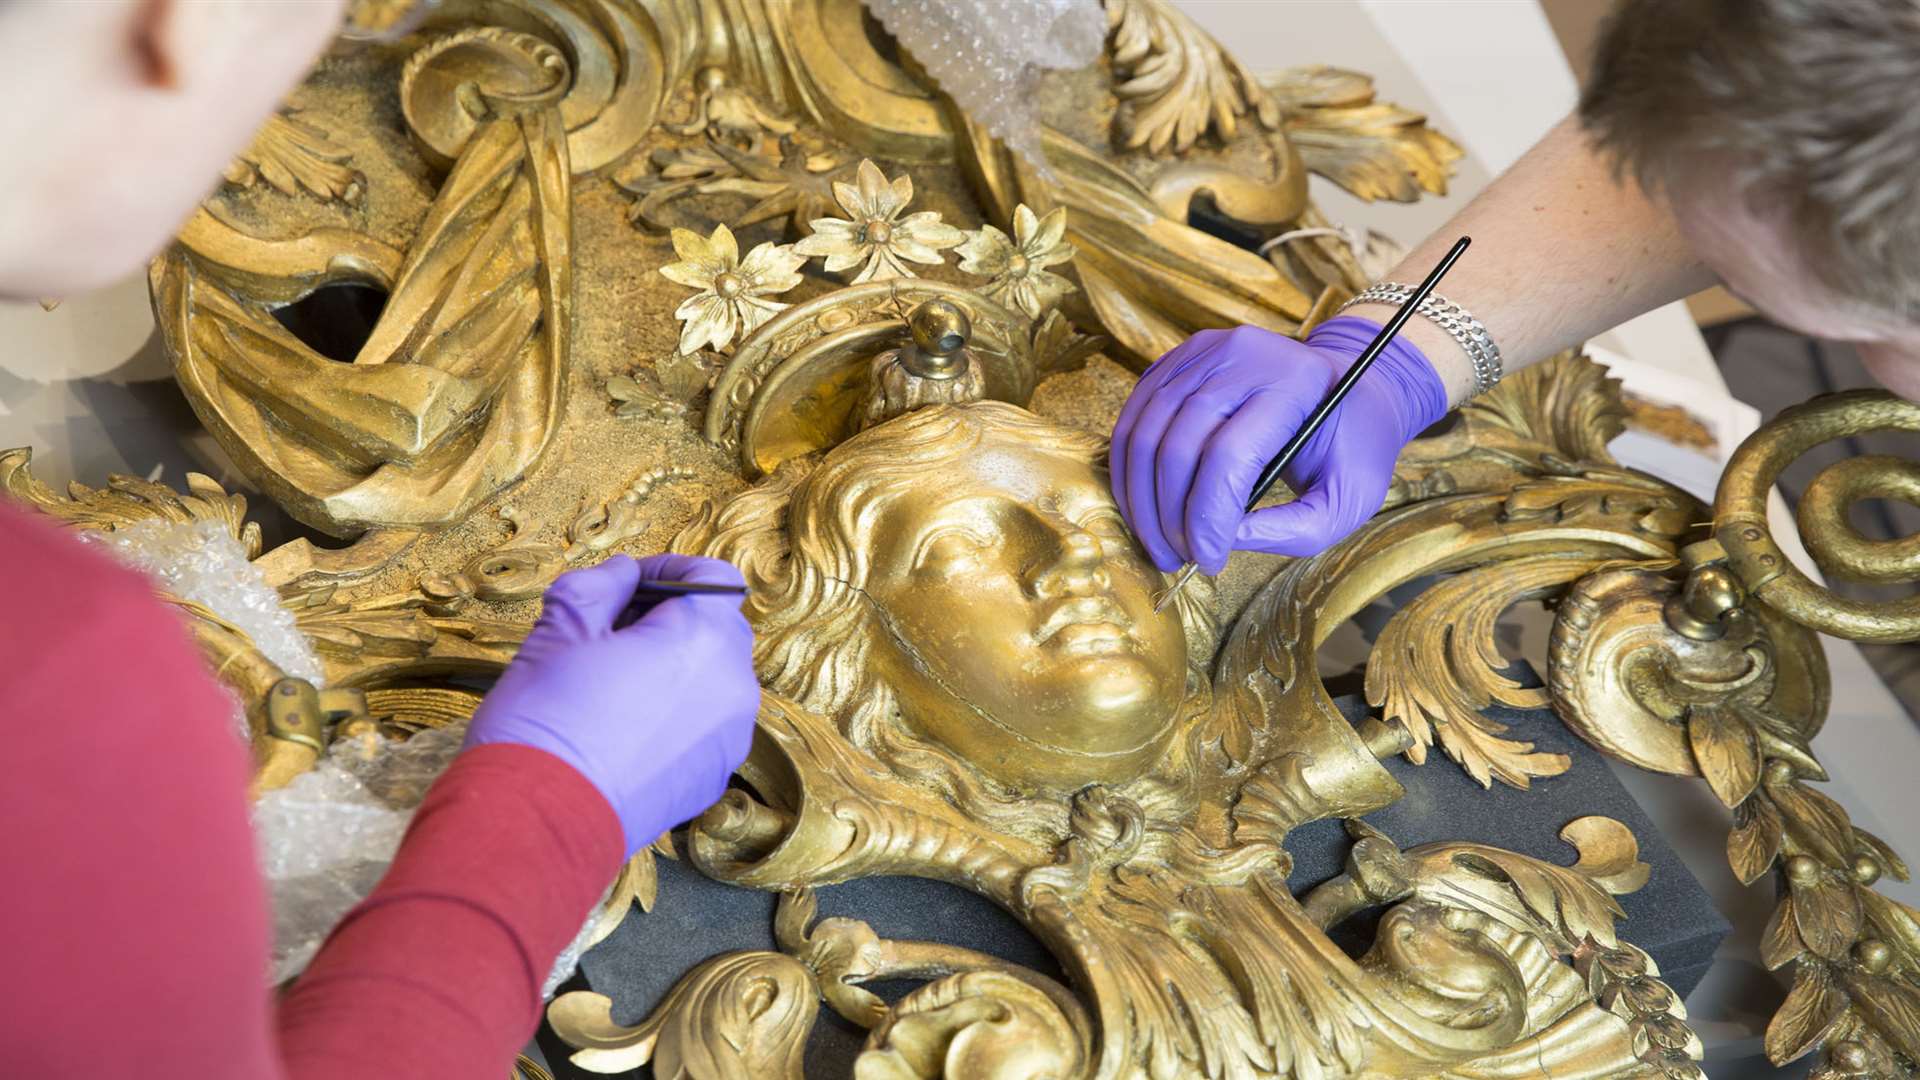 18th century William Kent designed, carved and gilded sconces from the Ballroom at Knole being restored. Picture: National Trust